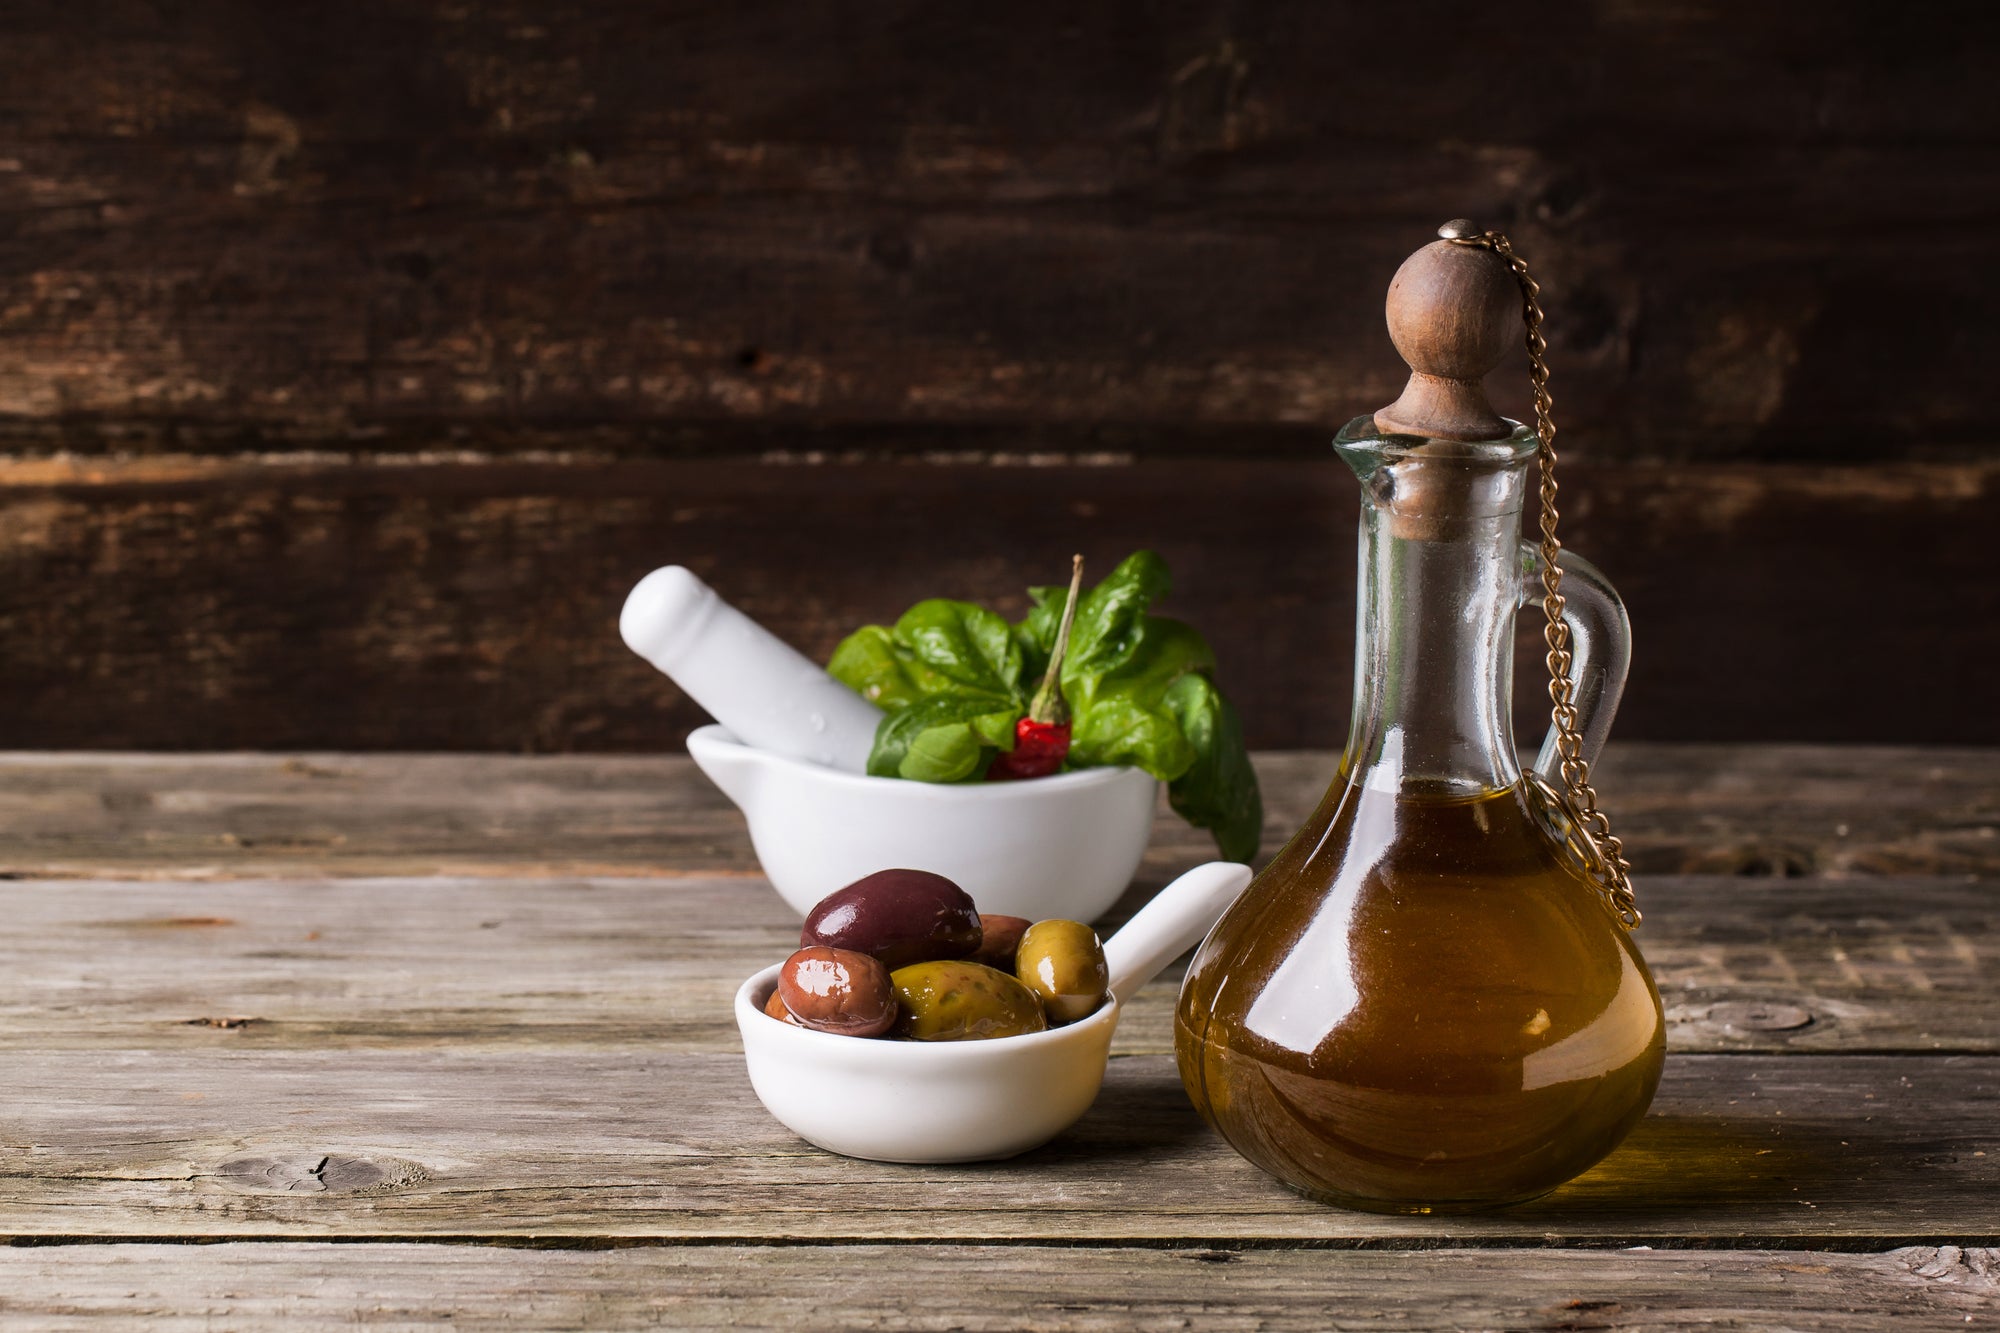 How to Pick the Healthiest Olive Oil